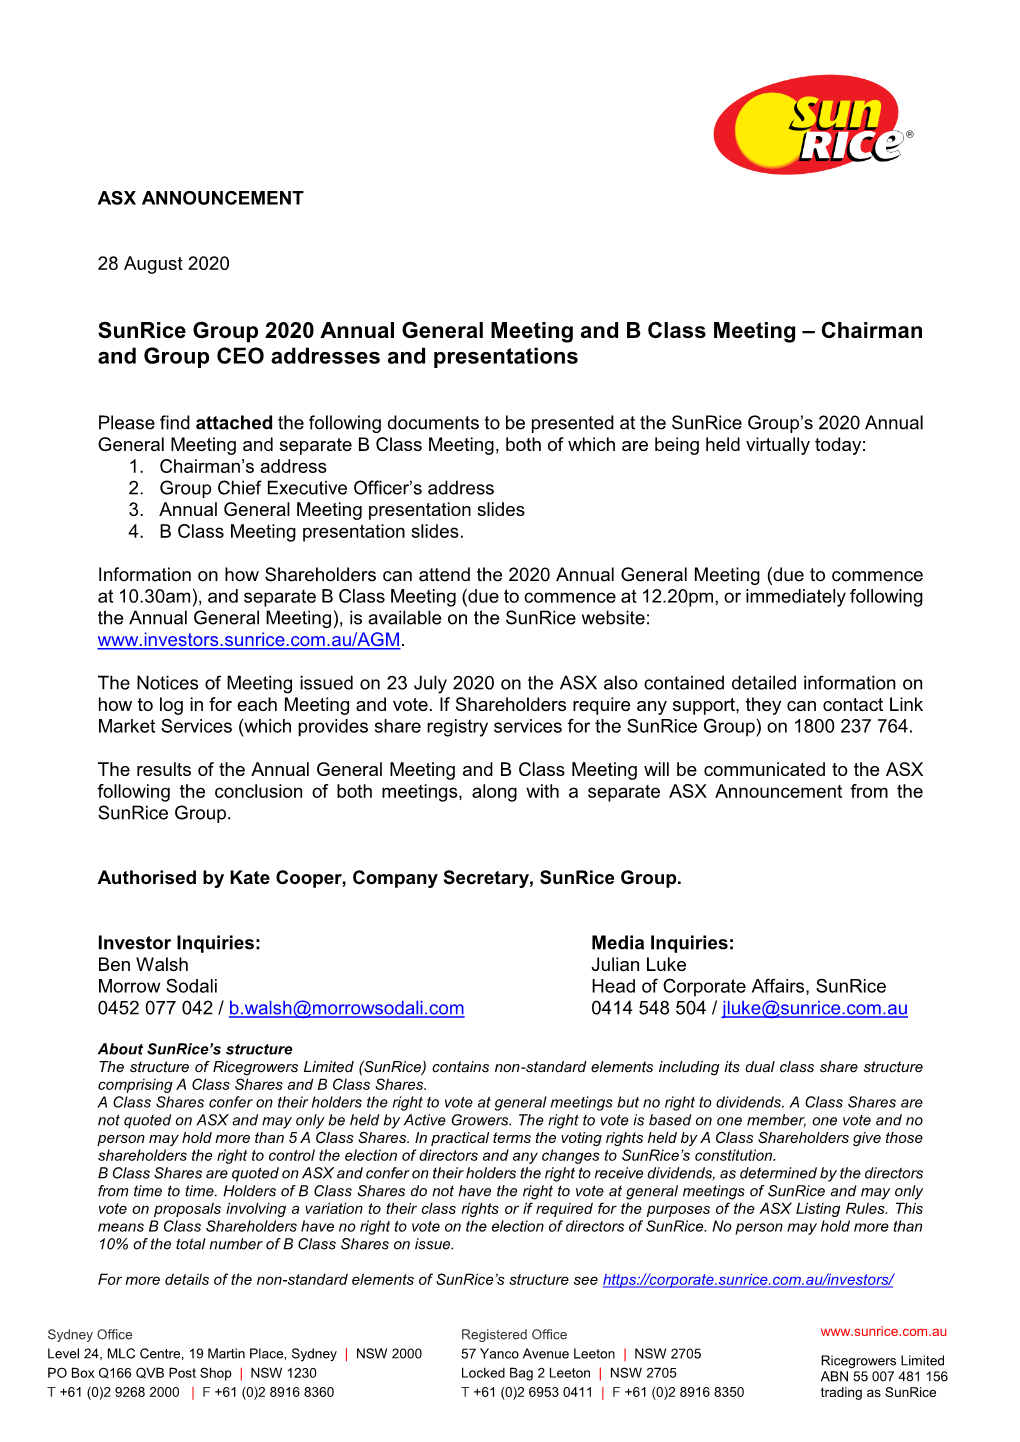 Sunrice Group ASX Announcement 2020 AGM and B